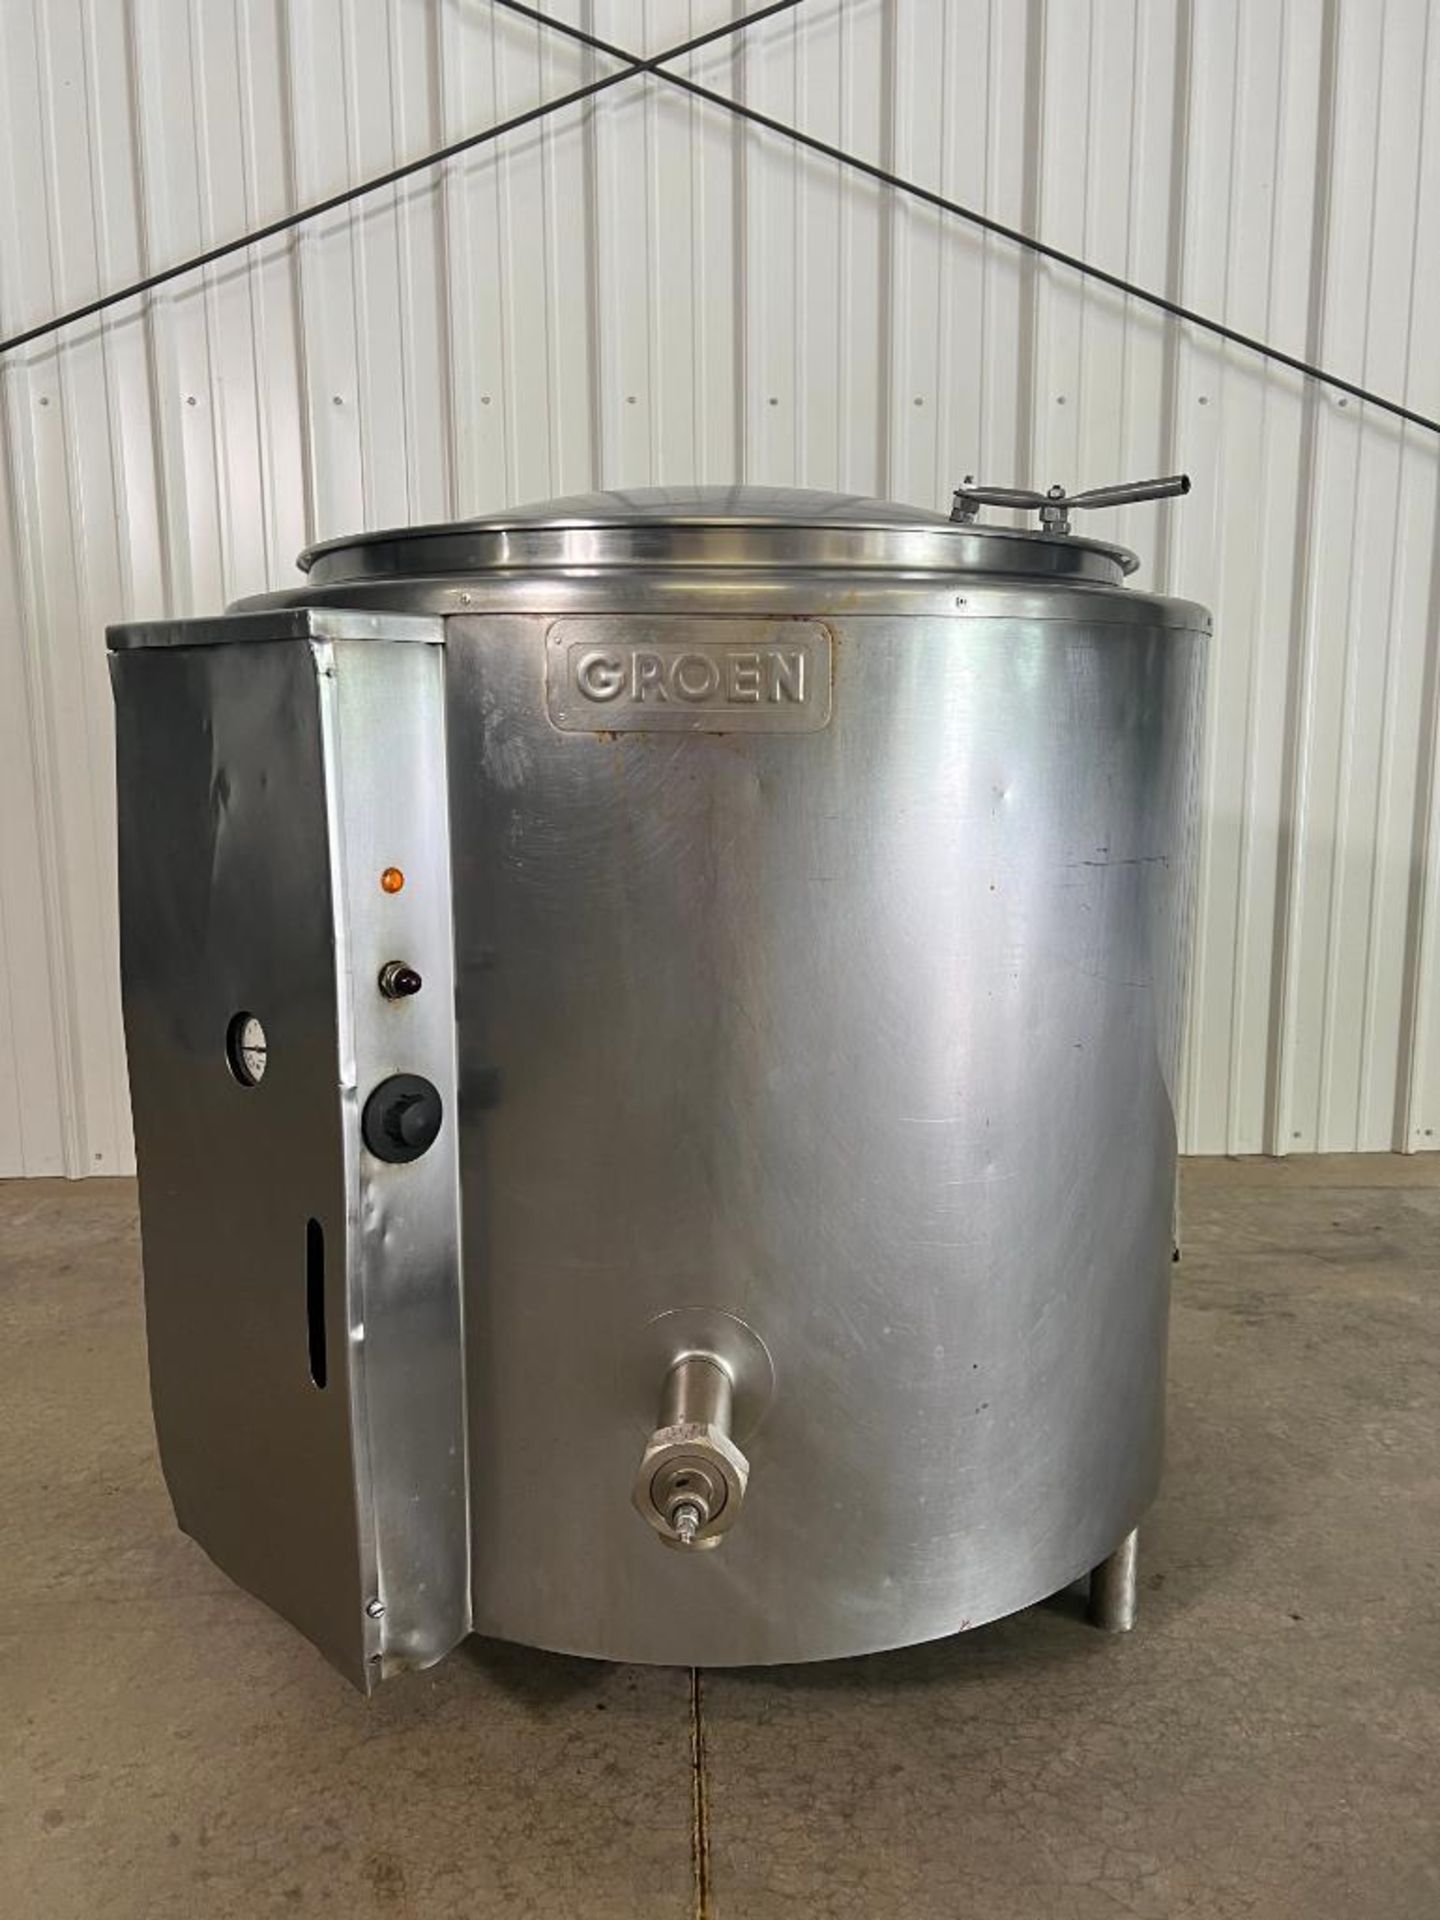 Groen 40 Gallon, Jacketed, S/S Kettle, Model EE-40, S/N 879D (Location: Export, PA)